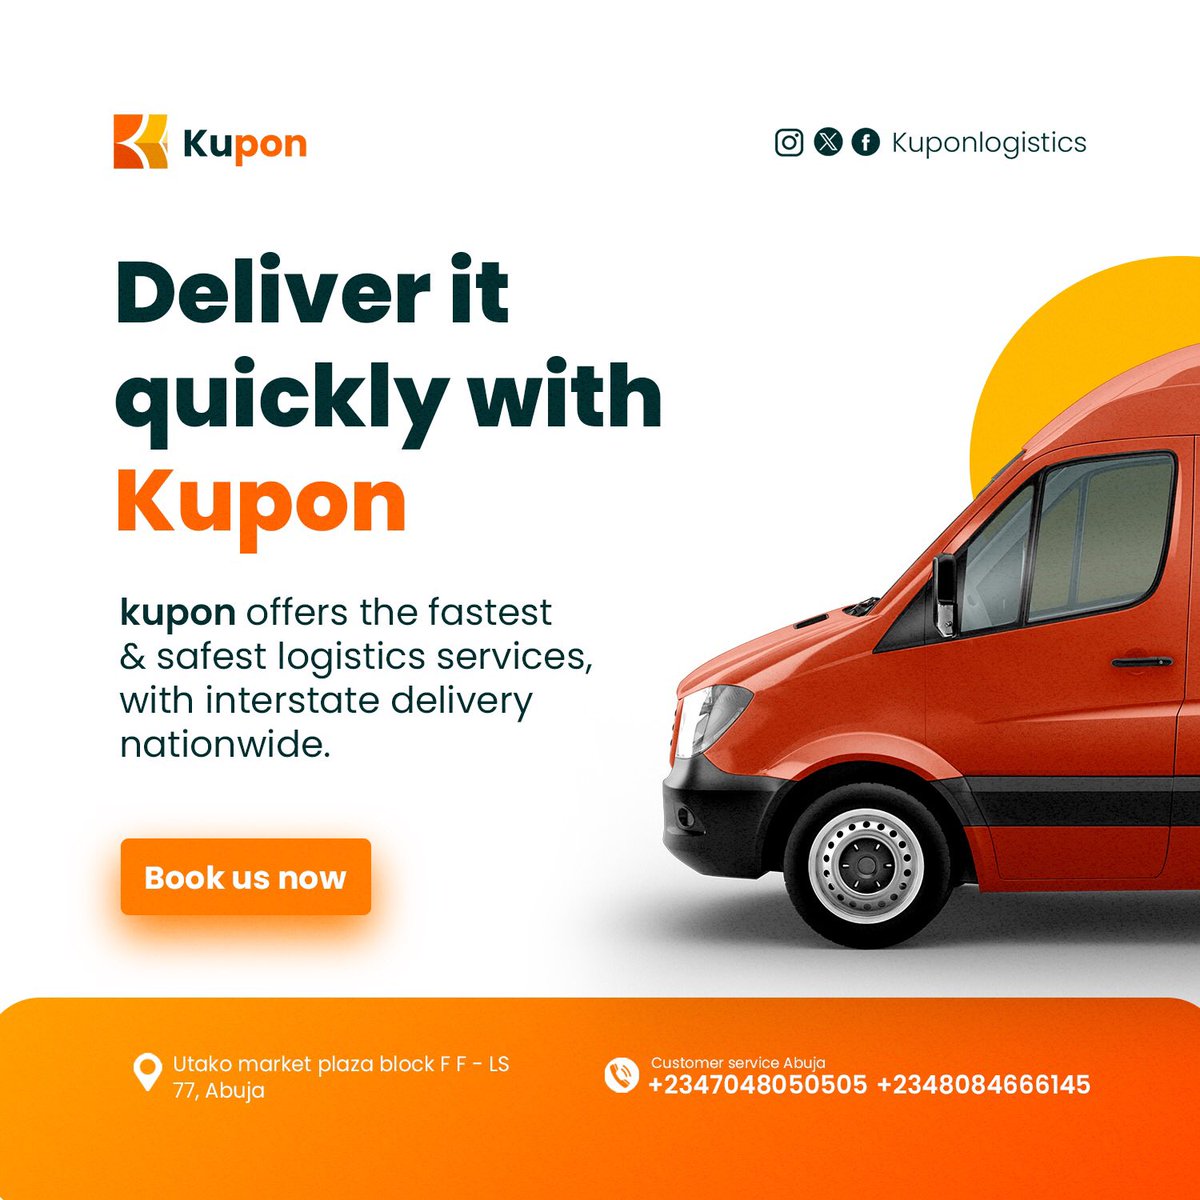 When it comes to shipping your items, we'll go the extra mile to deliver your packages anywhere in the country.

Visit any of our experience centers near you or ship your items with the #Kupon app today.

#kuponlogistics 
#WeDeliver
#sentpackage
#logisticsservices
#warehousing